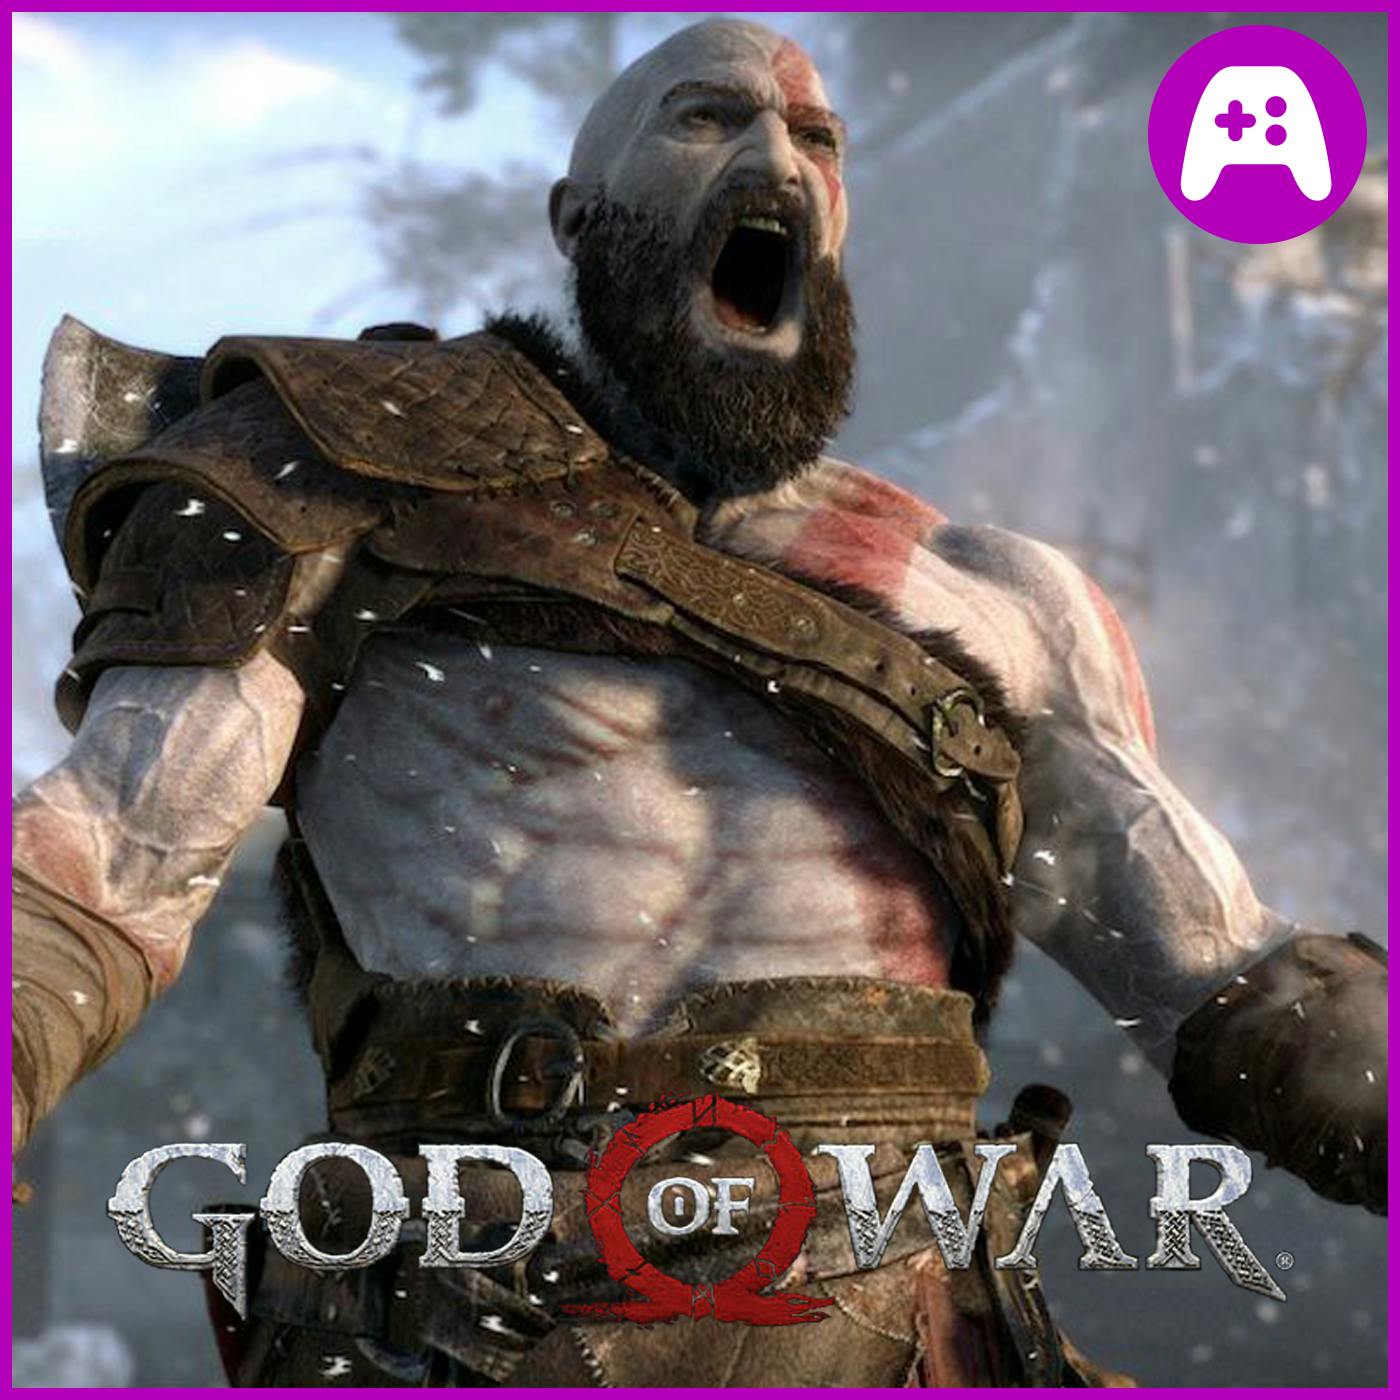 God of War PS4 Review (In Progress/Spoiler-Free!) - What's Good Games (Ep. 48)